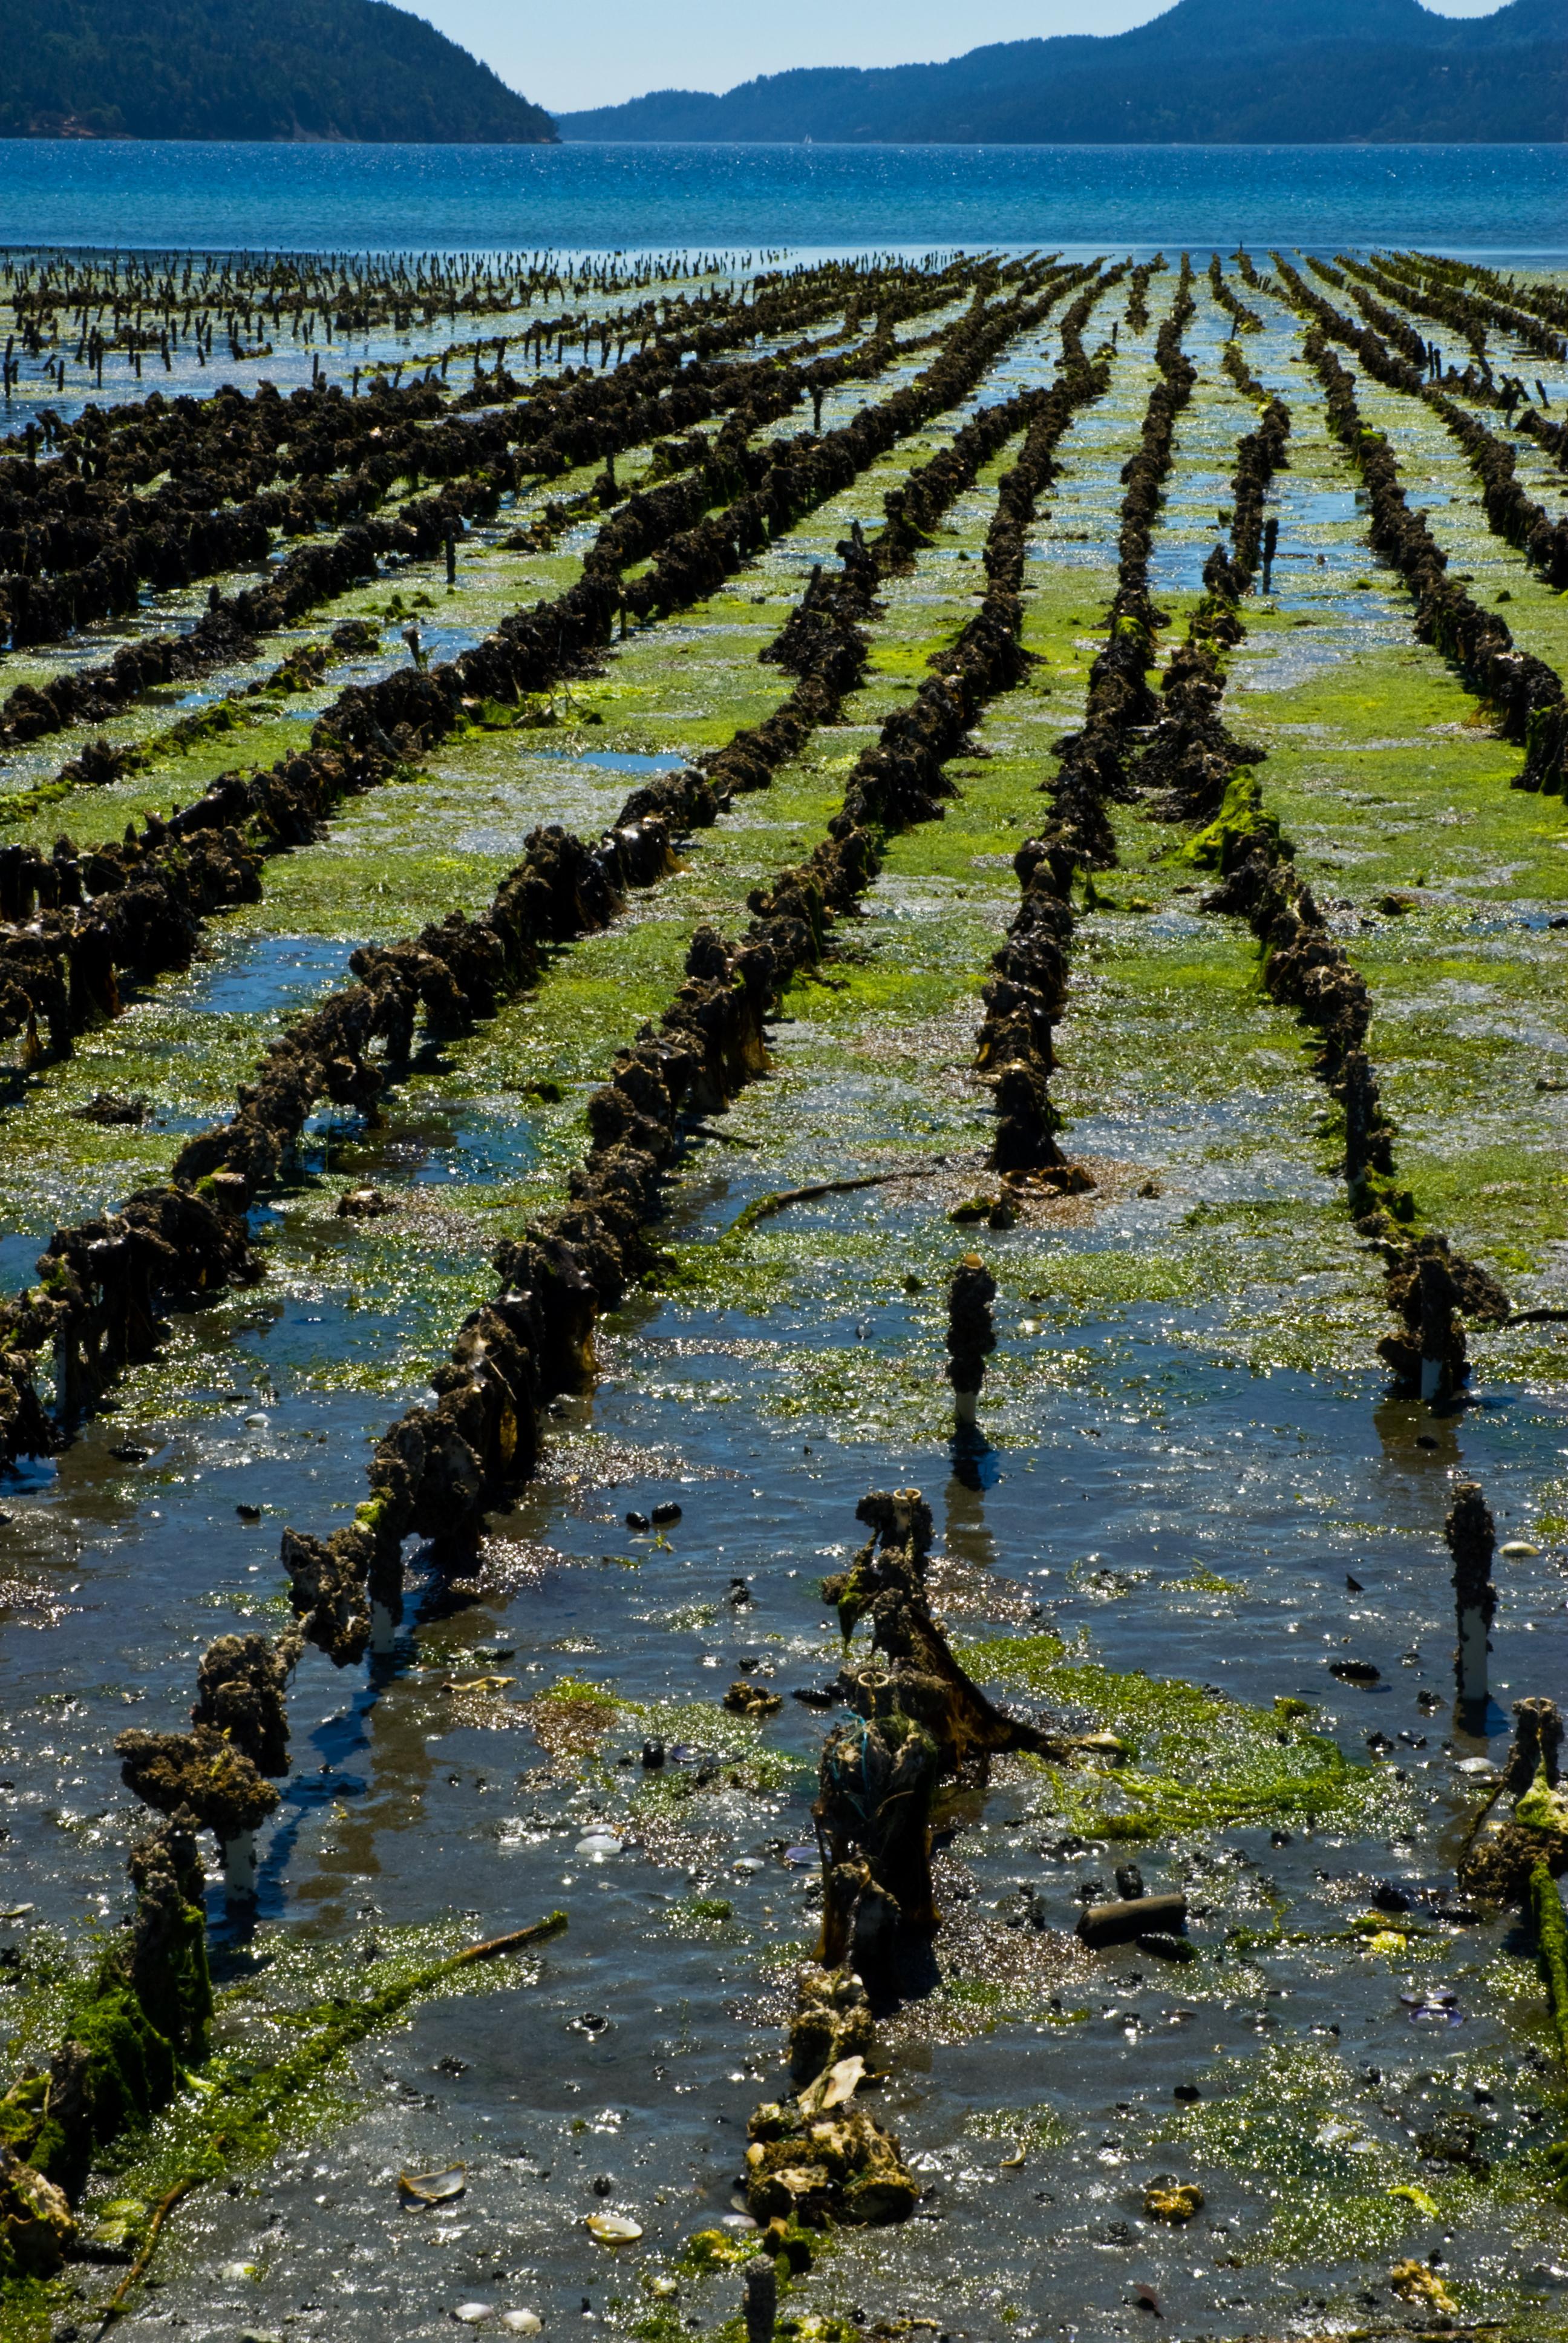 Oyster aquaculture farm in the Pacific Northwest. photo credit iStockphoto.com/pflemming 